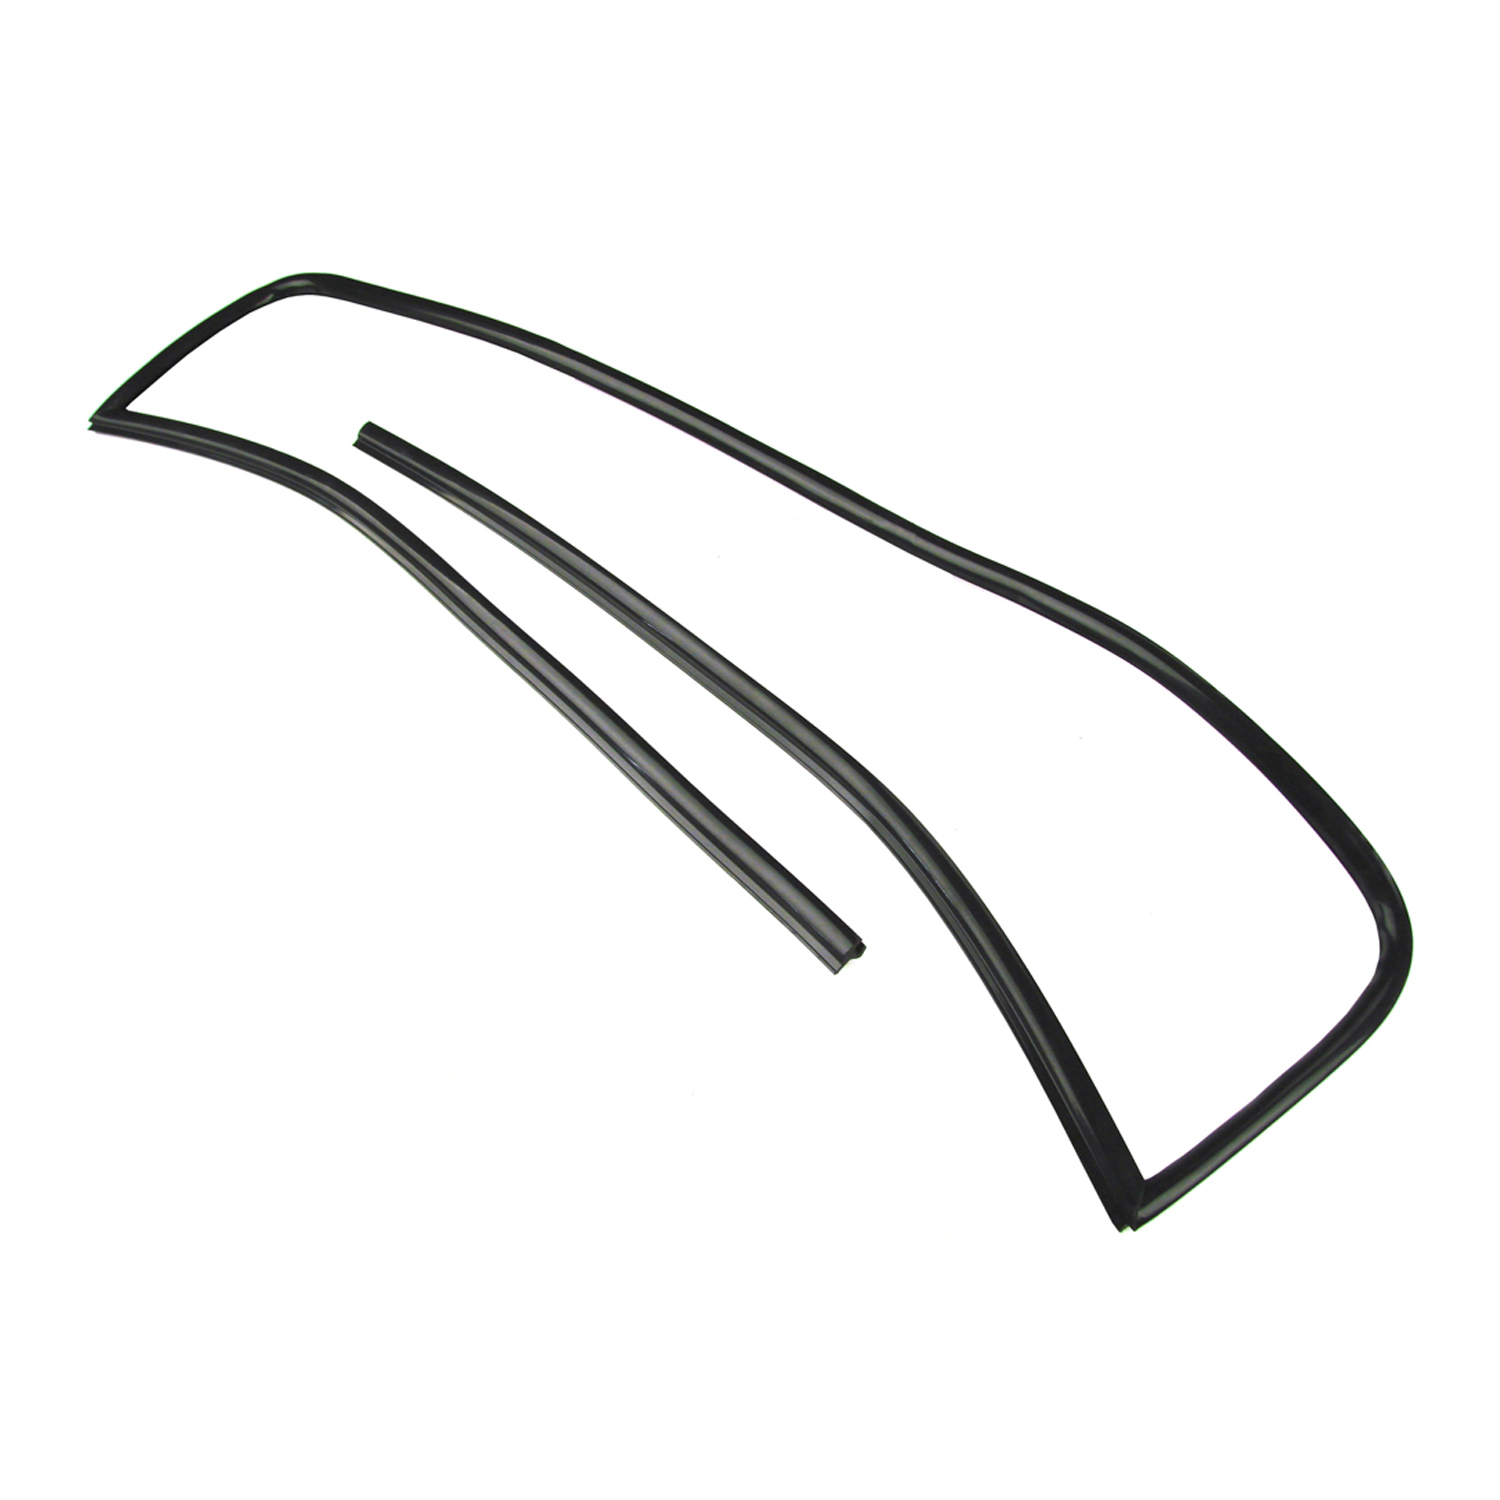 1997 Chevrolet Camaro Windshield Seal, 93-02 GM F Body Coupe Without T-Top Option, Each-VWS 1967-M